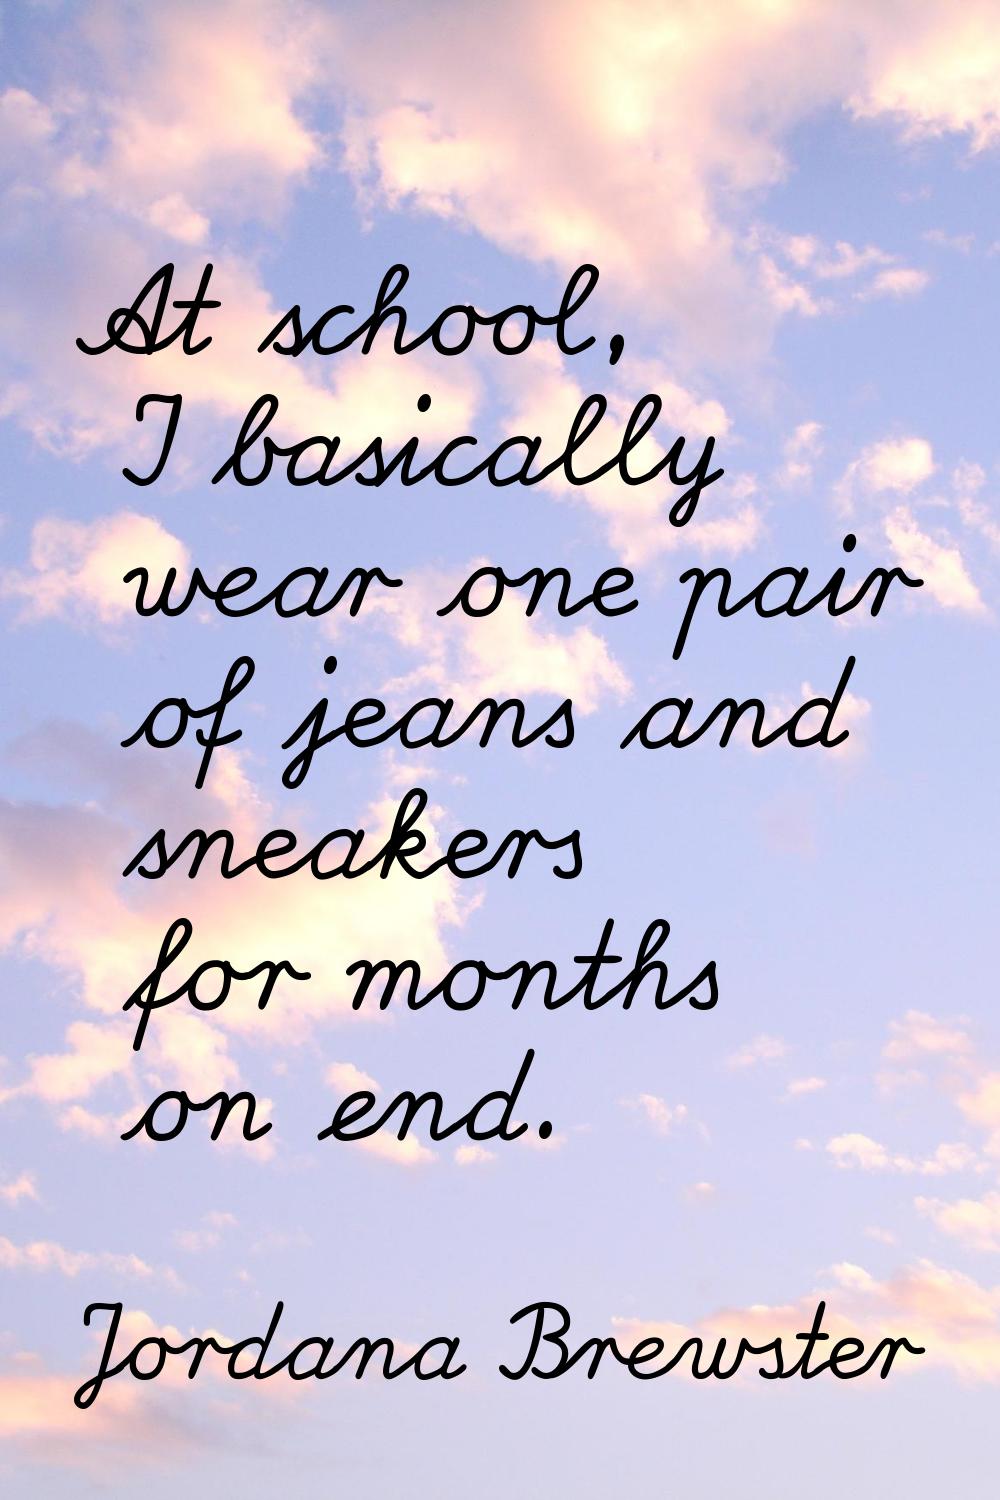 At school, I basically wear one pair of jeans and sneakers for months on end.